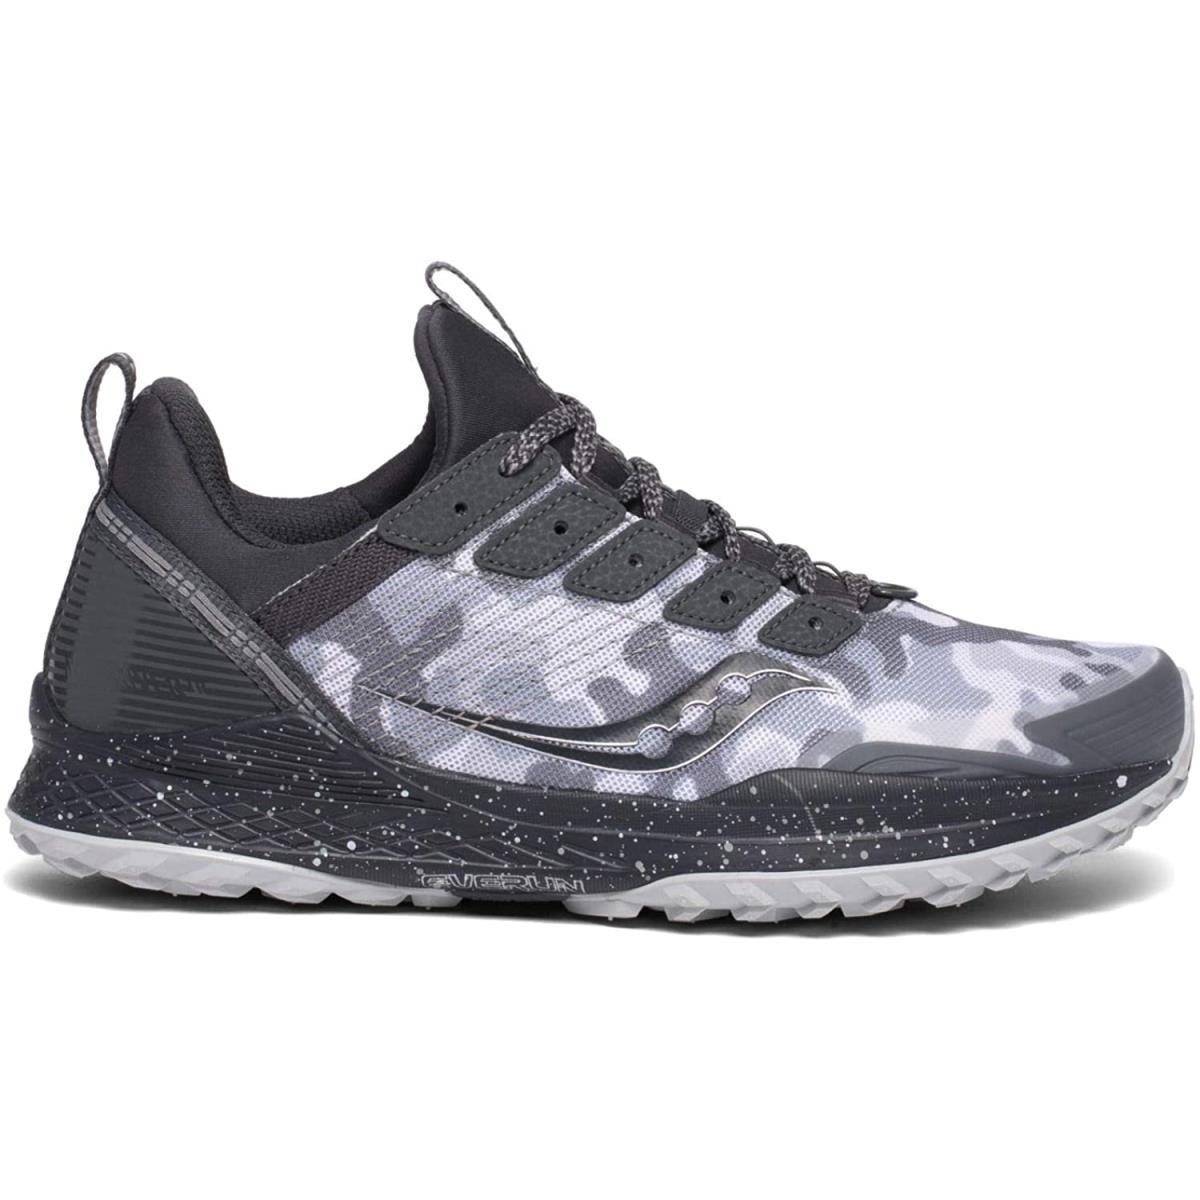 Saucony Women`s Mad River TR Trail Running Shoe White/Black